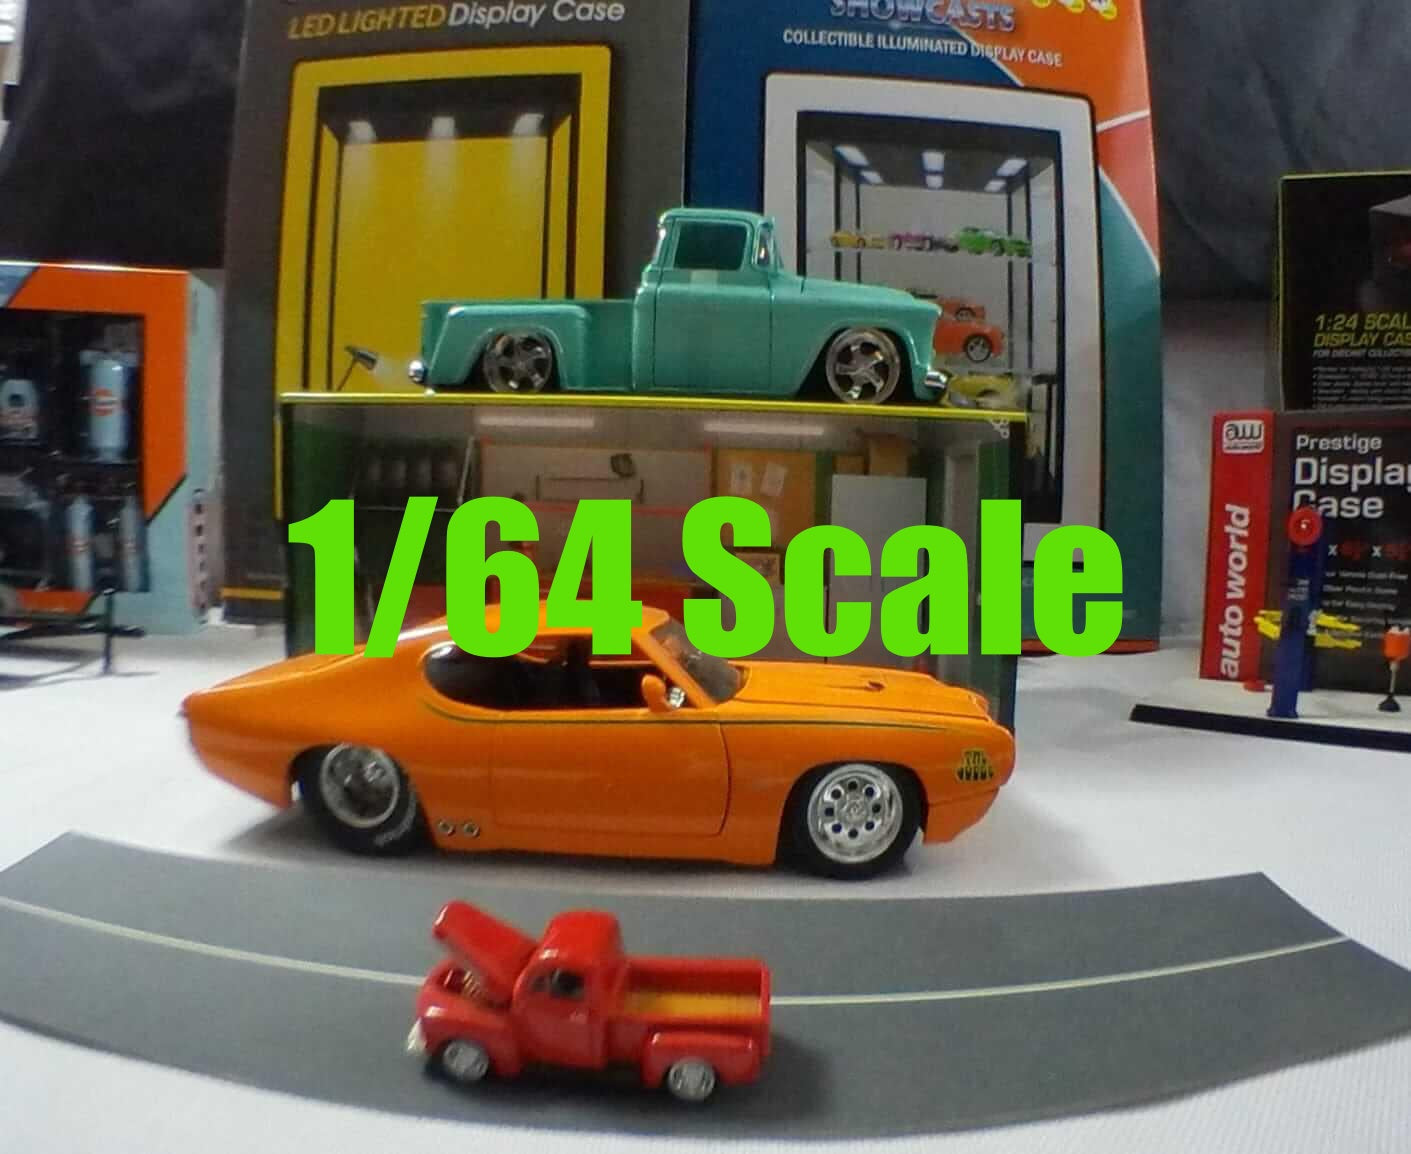 1:64 Scale models